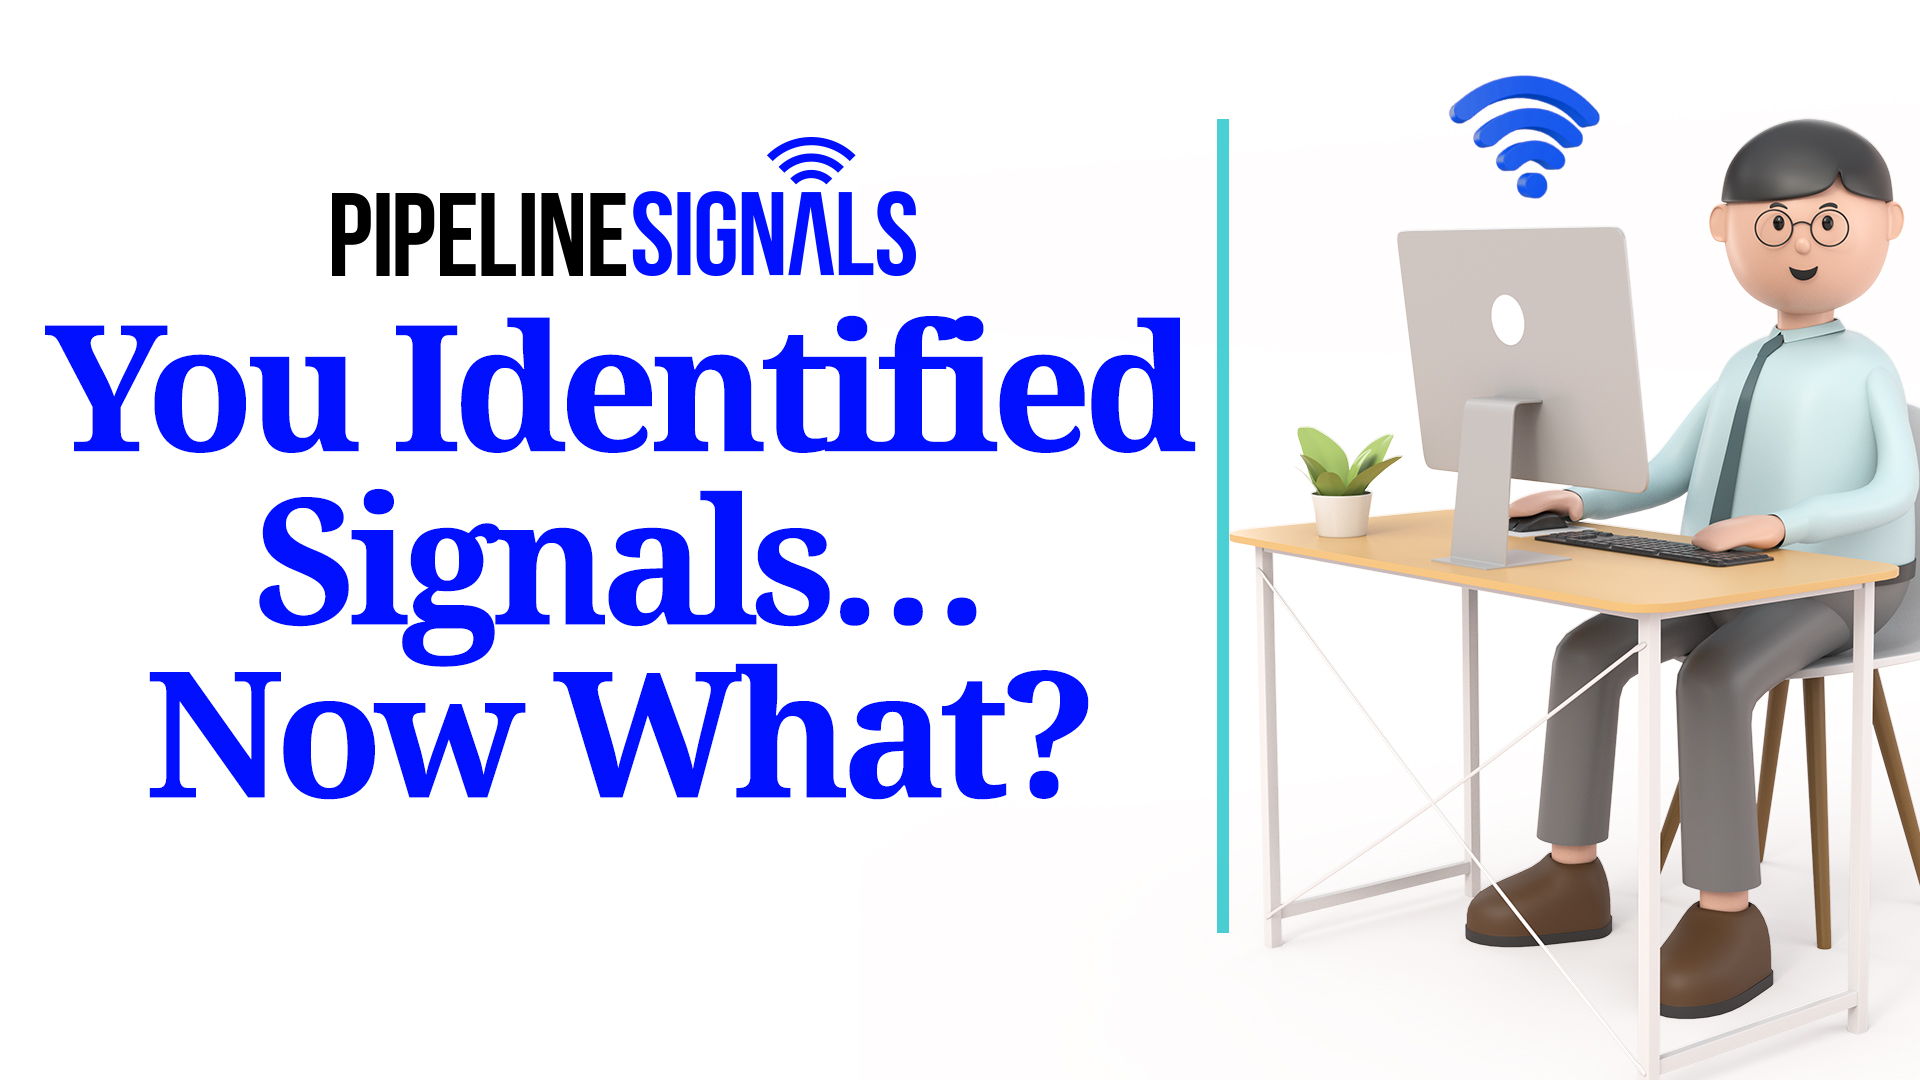 you identified signals now what?